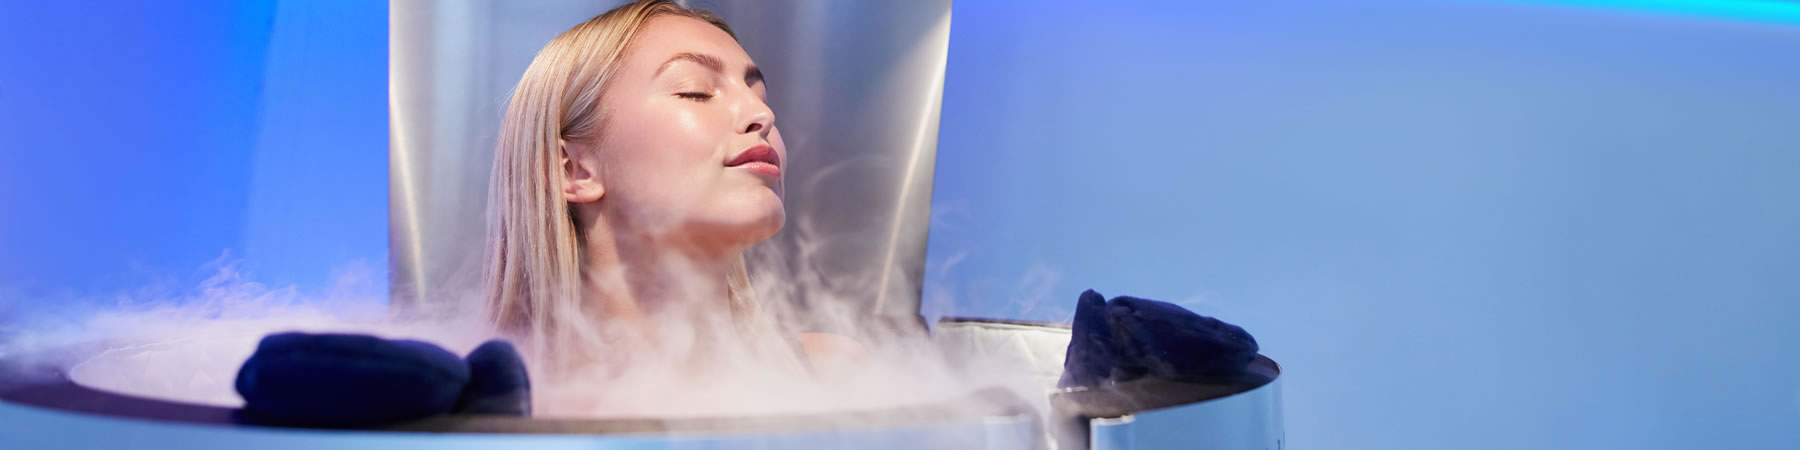 Use this mobile application from Glacial Peak Cryotherapy of Fargo, North Dakota.